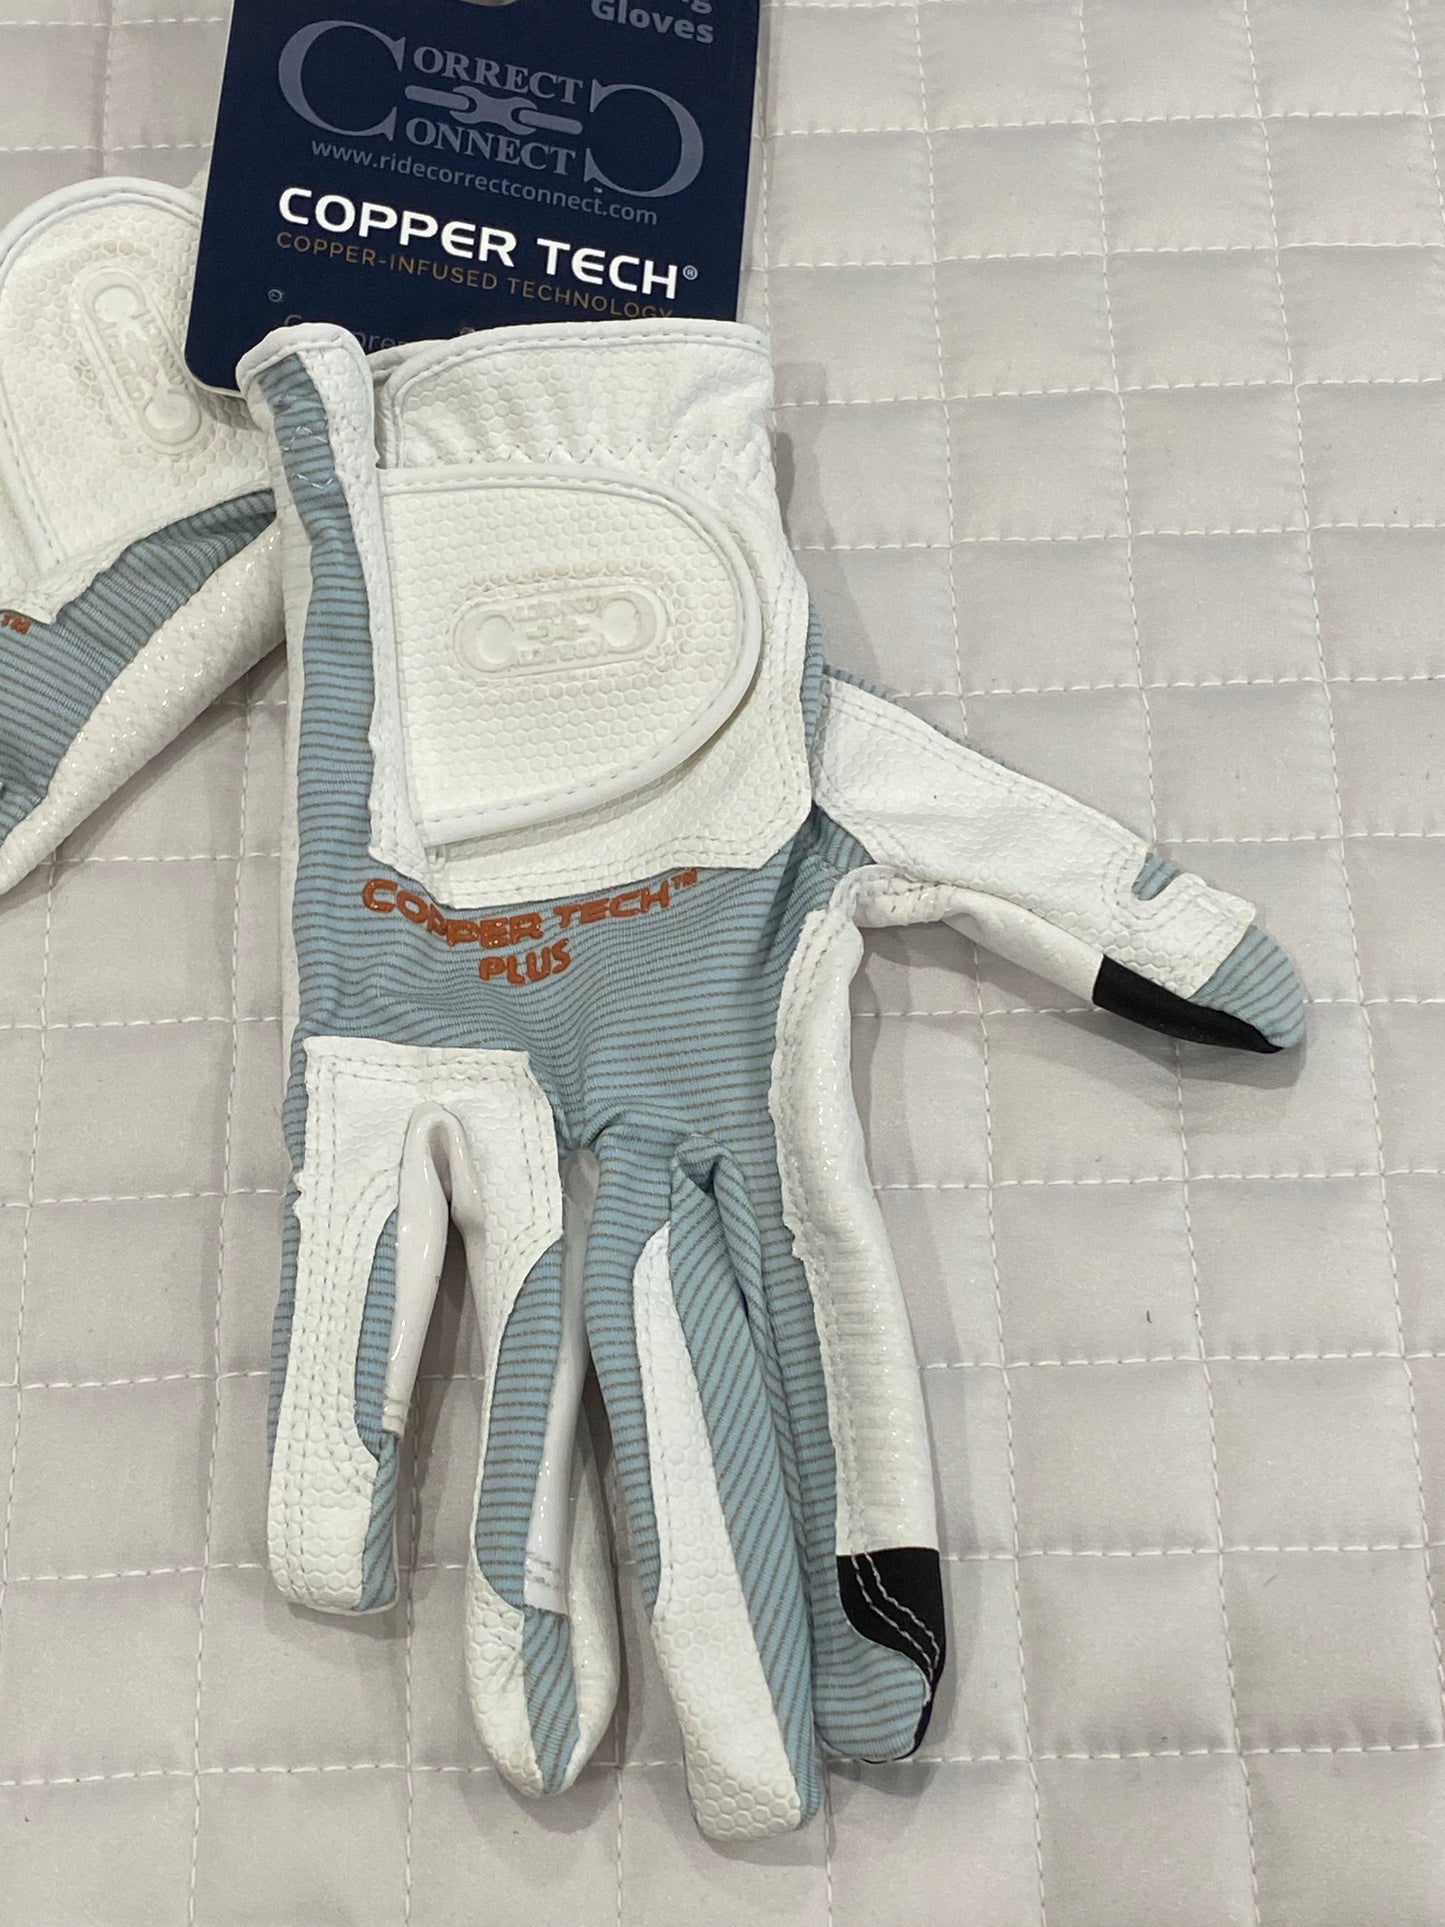 OLD STYLE Correct Connect ™ Coppertech Pro Silicone grip Compression Glove | White OR black